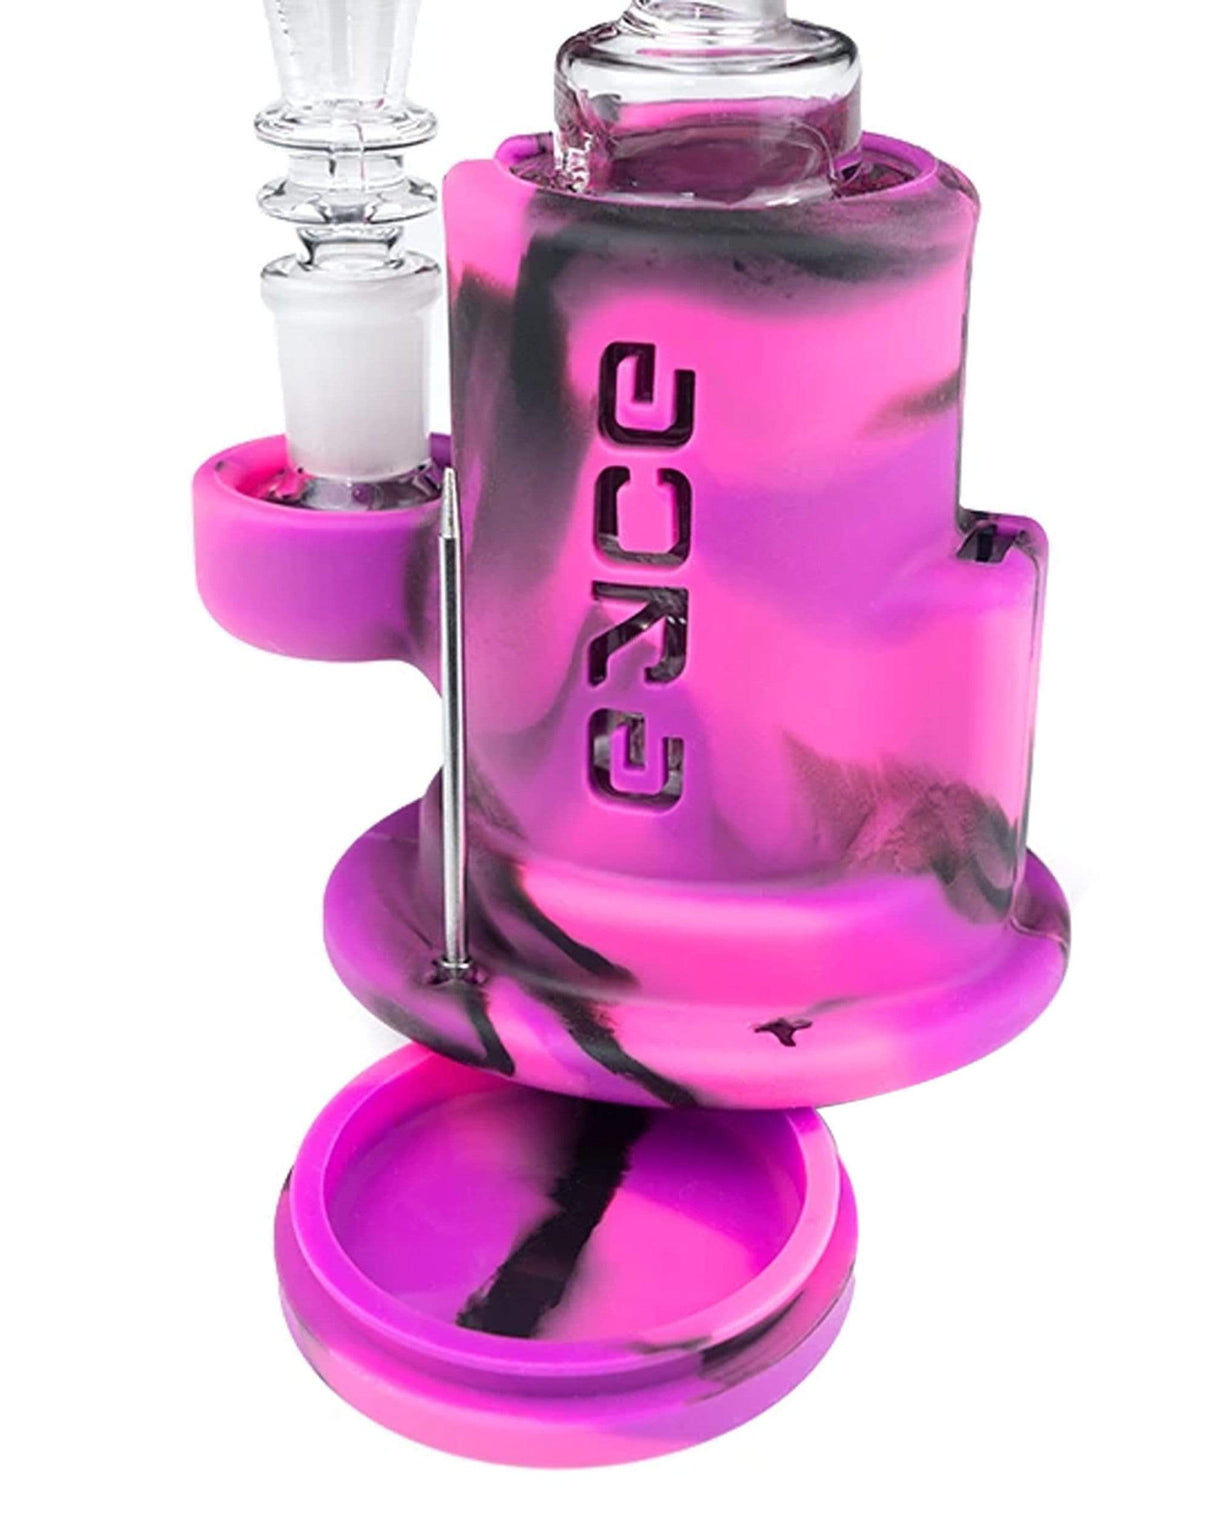 Eyce Spark Dab Rig in purple with showerhead percolator, side view on white background